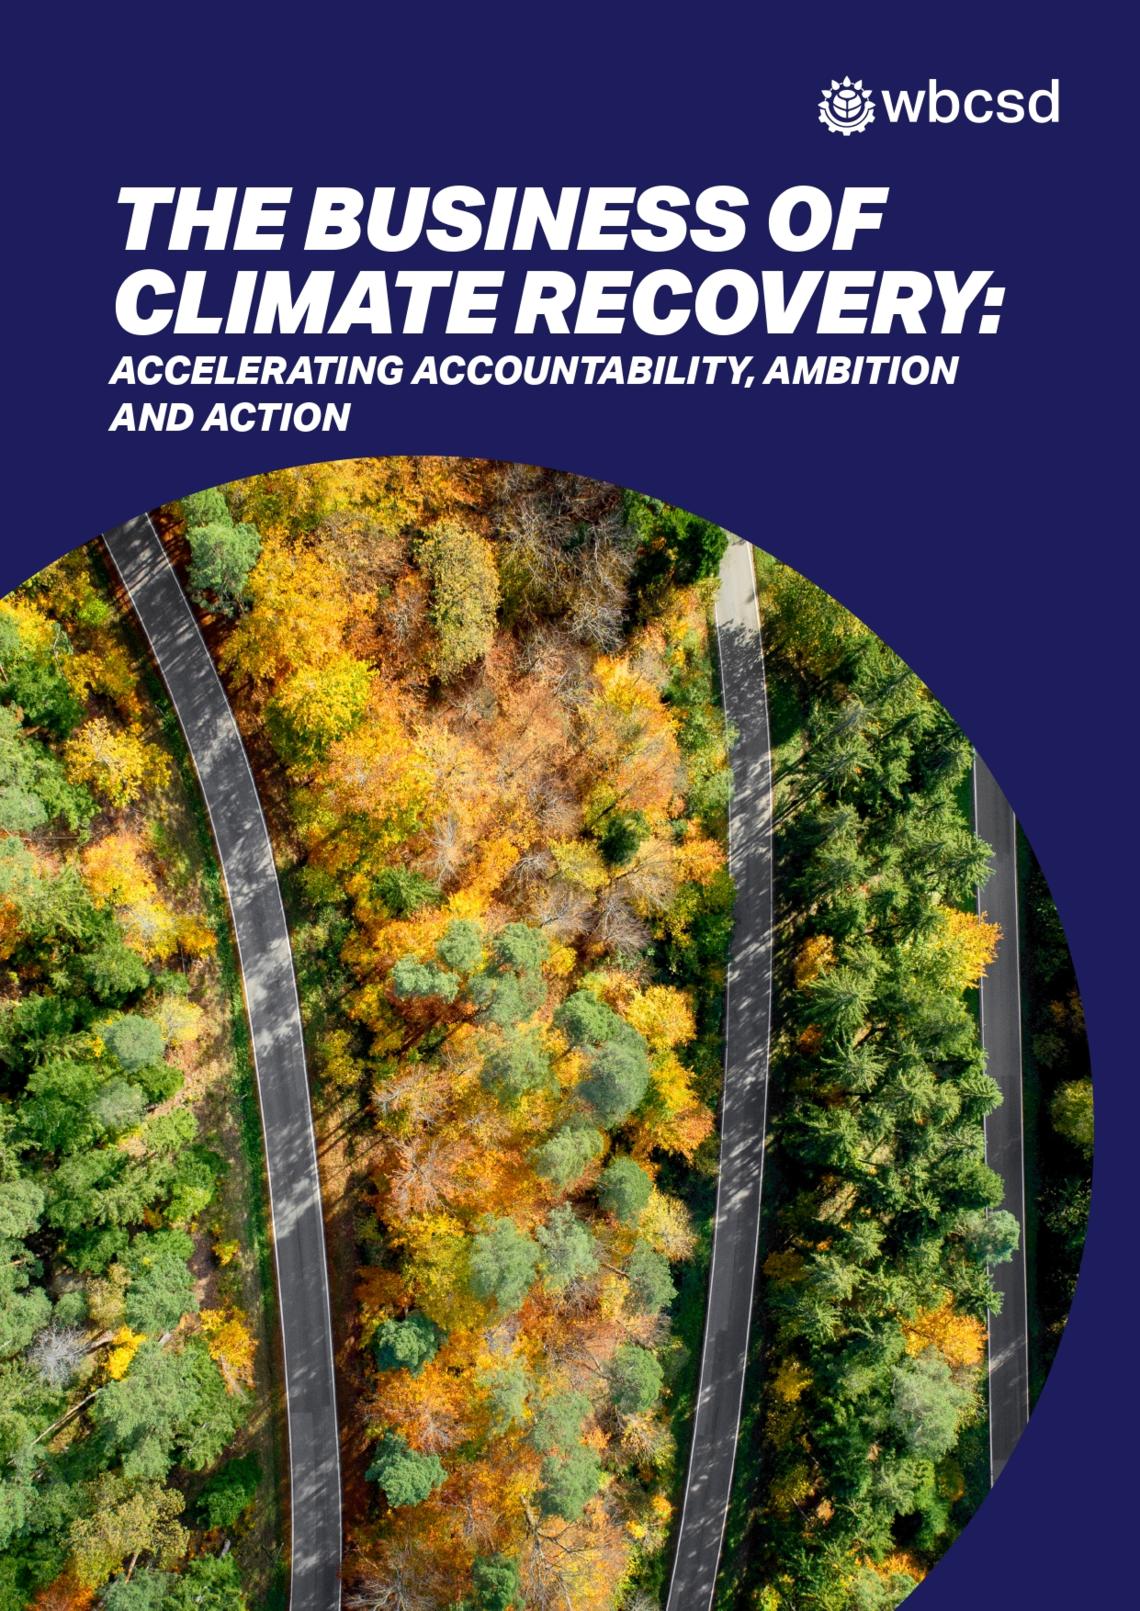 The Business of Climate Recovery: Accelerating Accountability, Ambition and Action